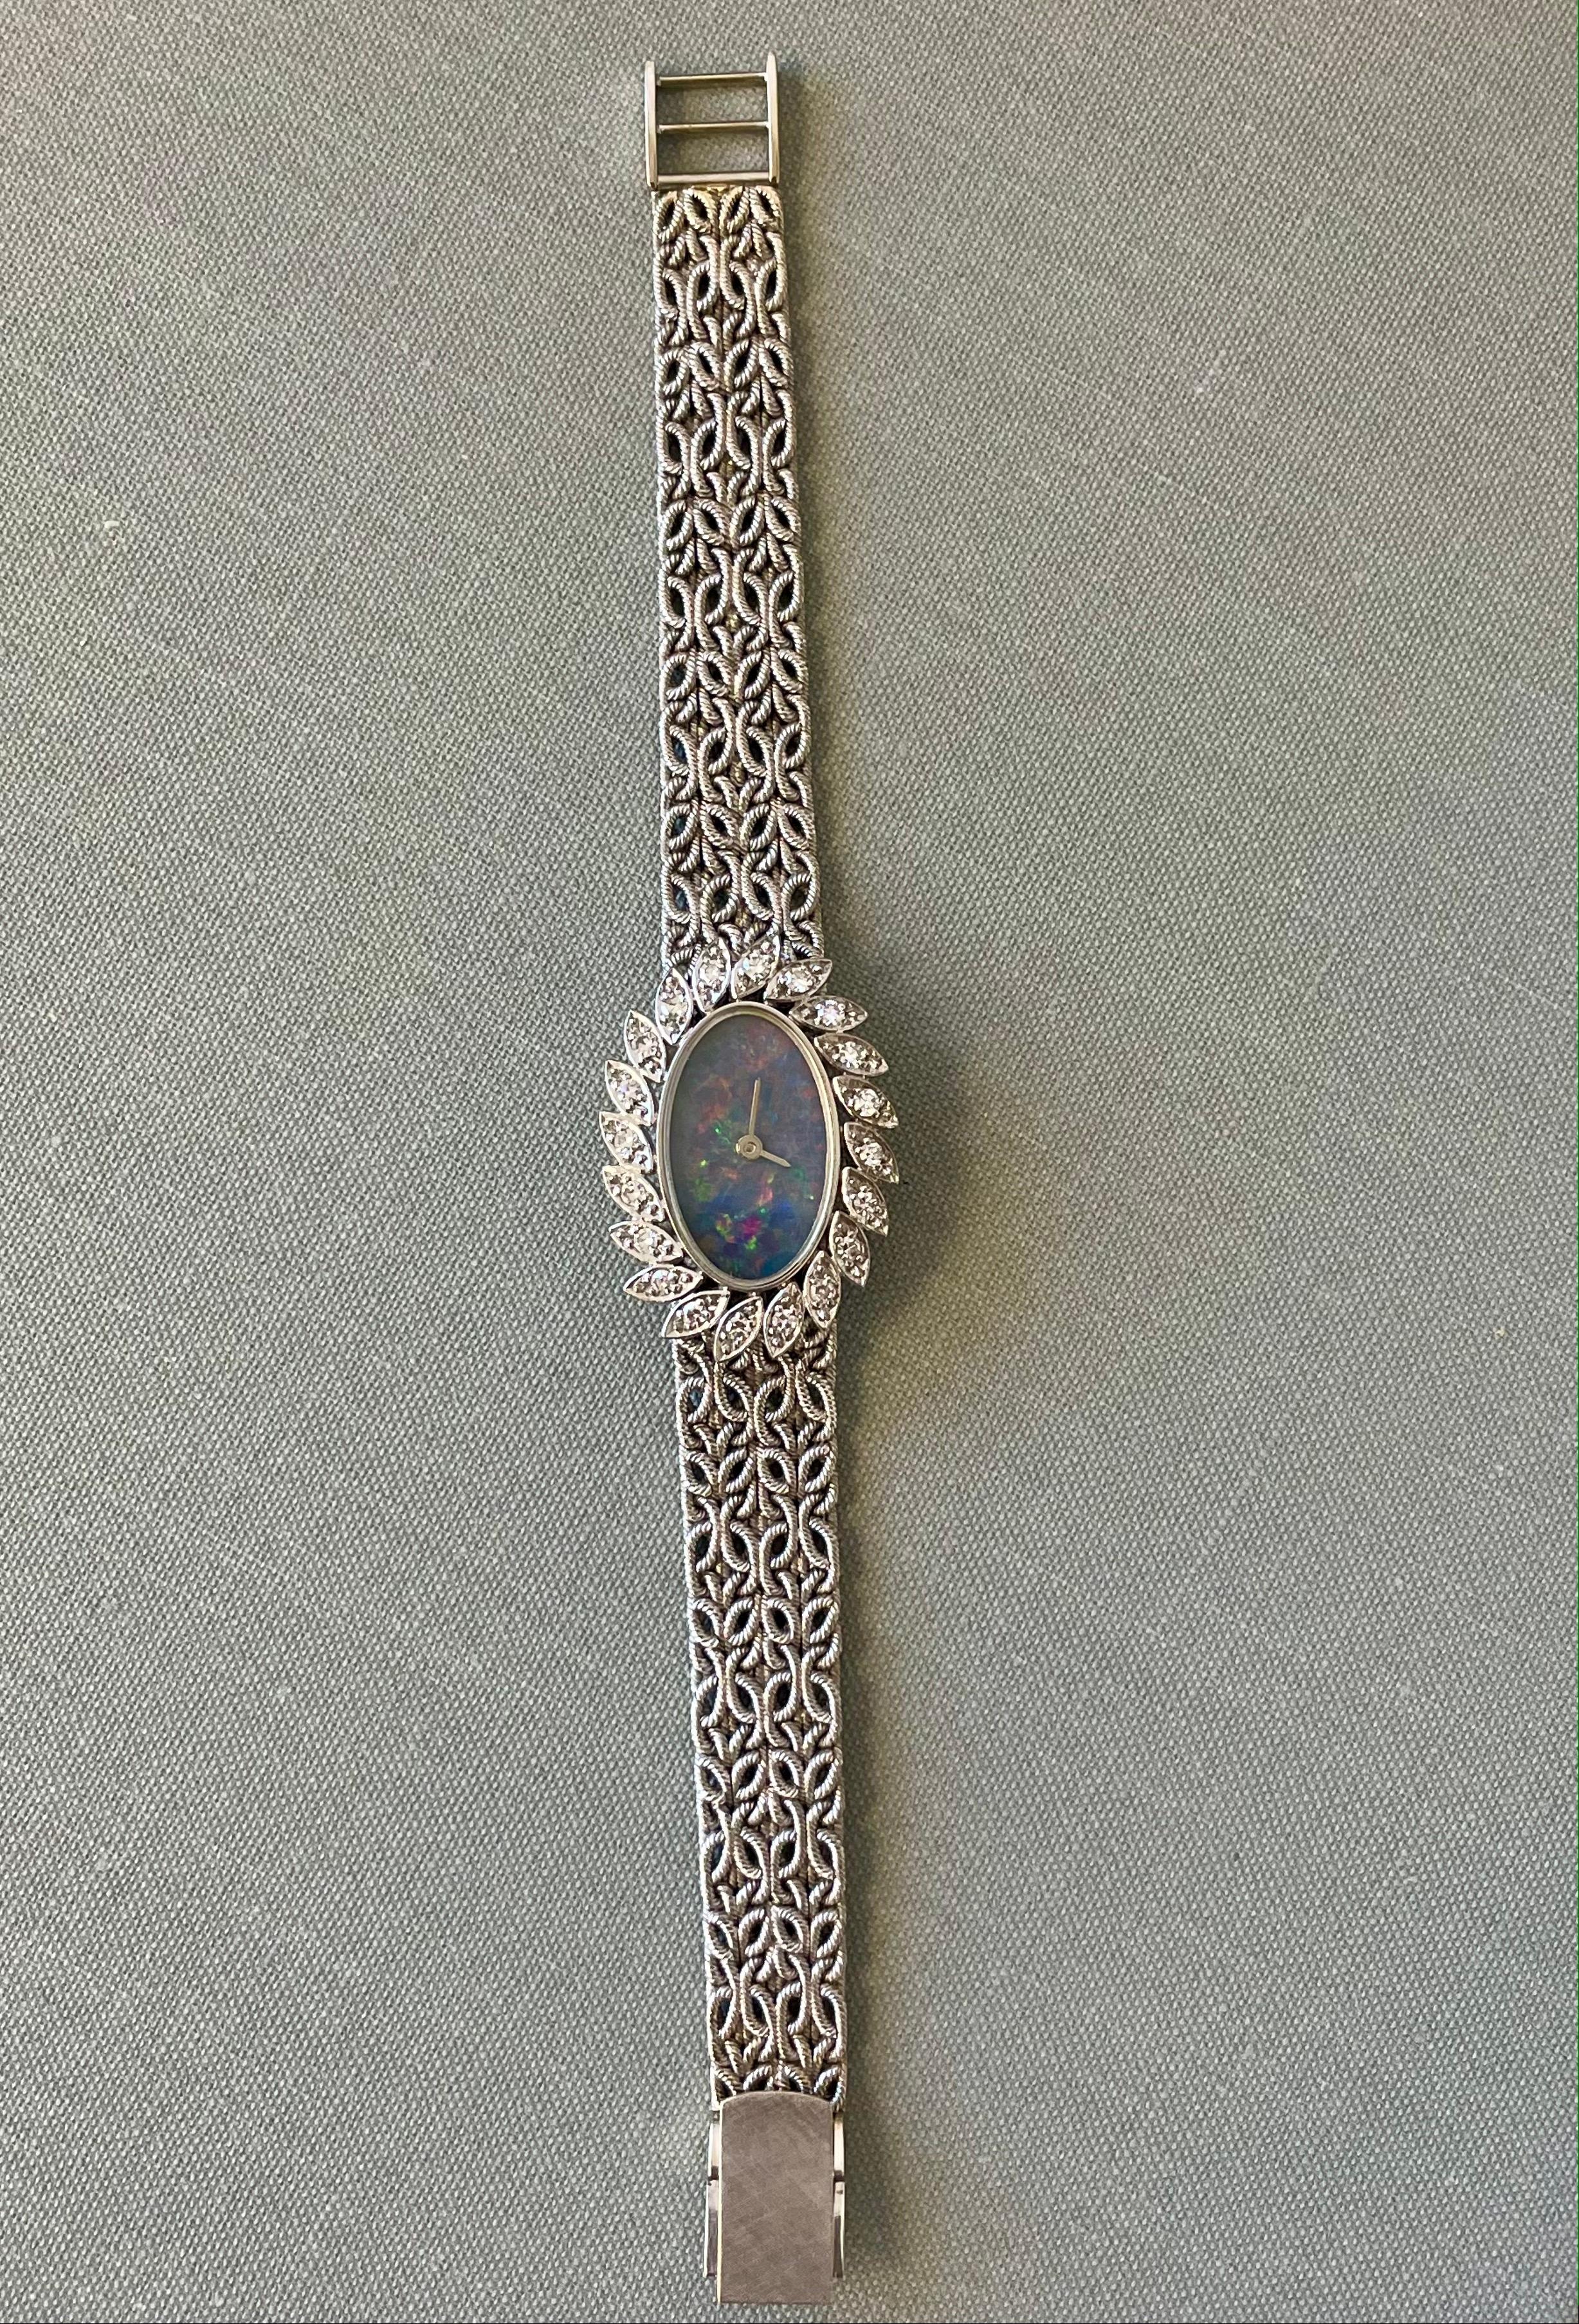 Chopard 18k White Gold Opal and Diamond Lady’s Watch For Sale 6